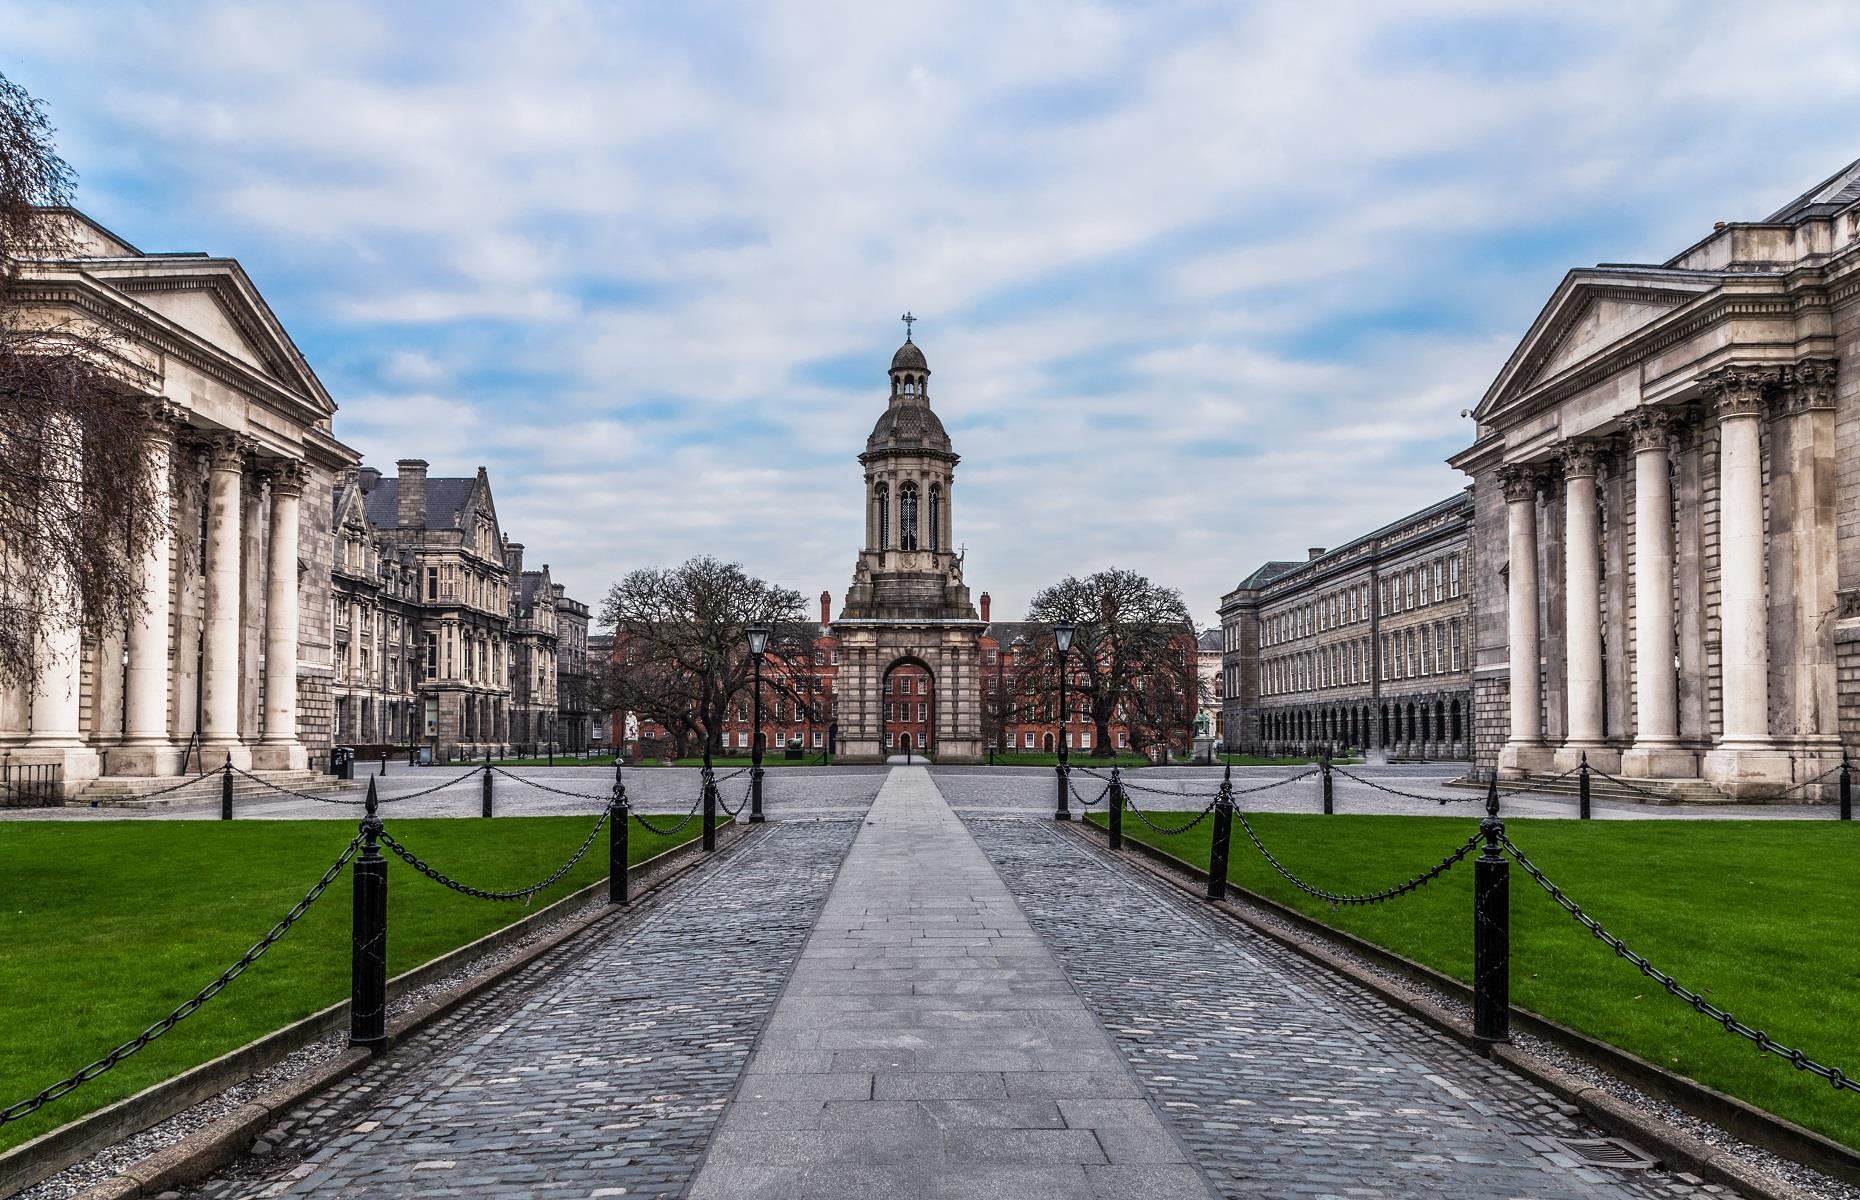 <p>Founded in 1592 by Queen Elizabeth I, <a href="https://www.tcd.ie/">Trinity College</a> is Ireland’s highest-ranked university. Yet its academic merits are not the only thing to admire about this historic institution, because the buildings that make up the campus are some of the finest in all of Dublin. Oscar Wilde and Samuel Beckett attended Trinity and any visitor shouldn't miss a trip to the library. The 16th-century building has floor-to-ceiling wooden shelves packed with hundreds of thousands of books.</p>